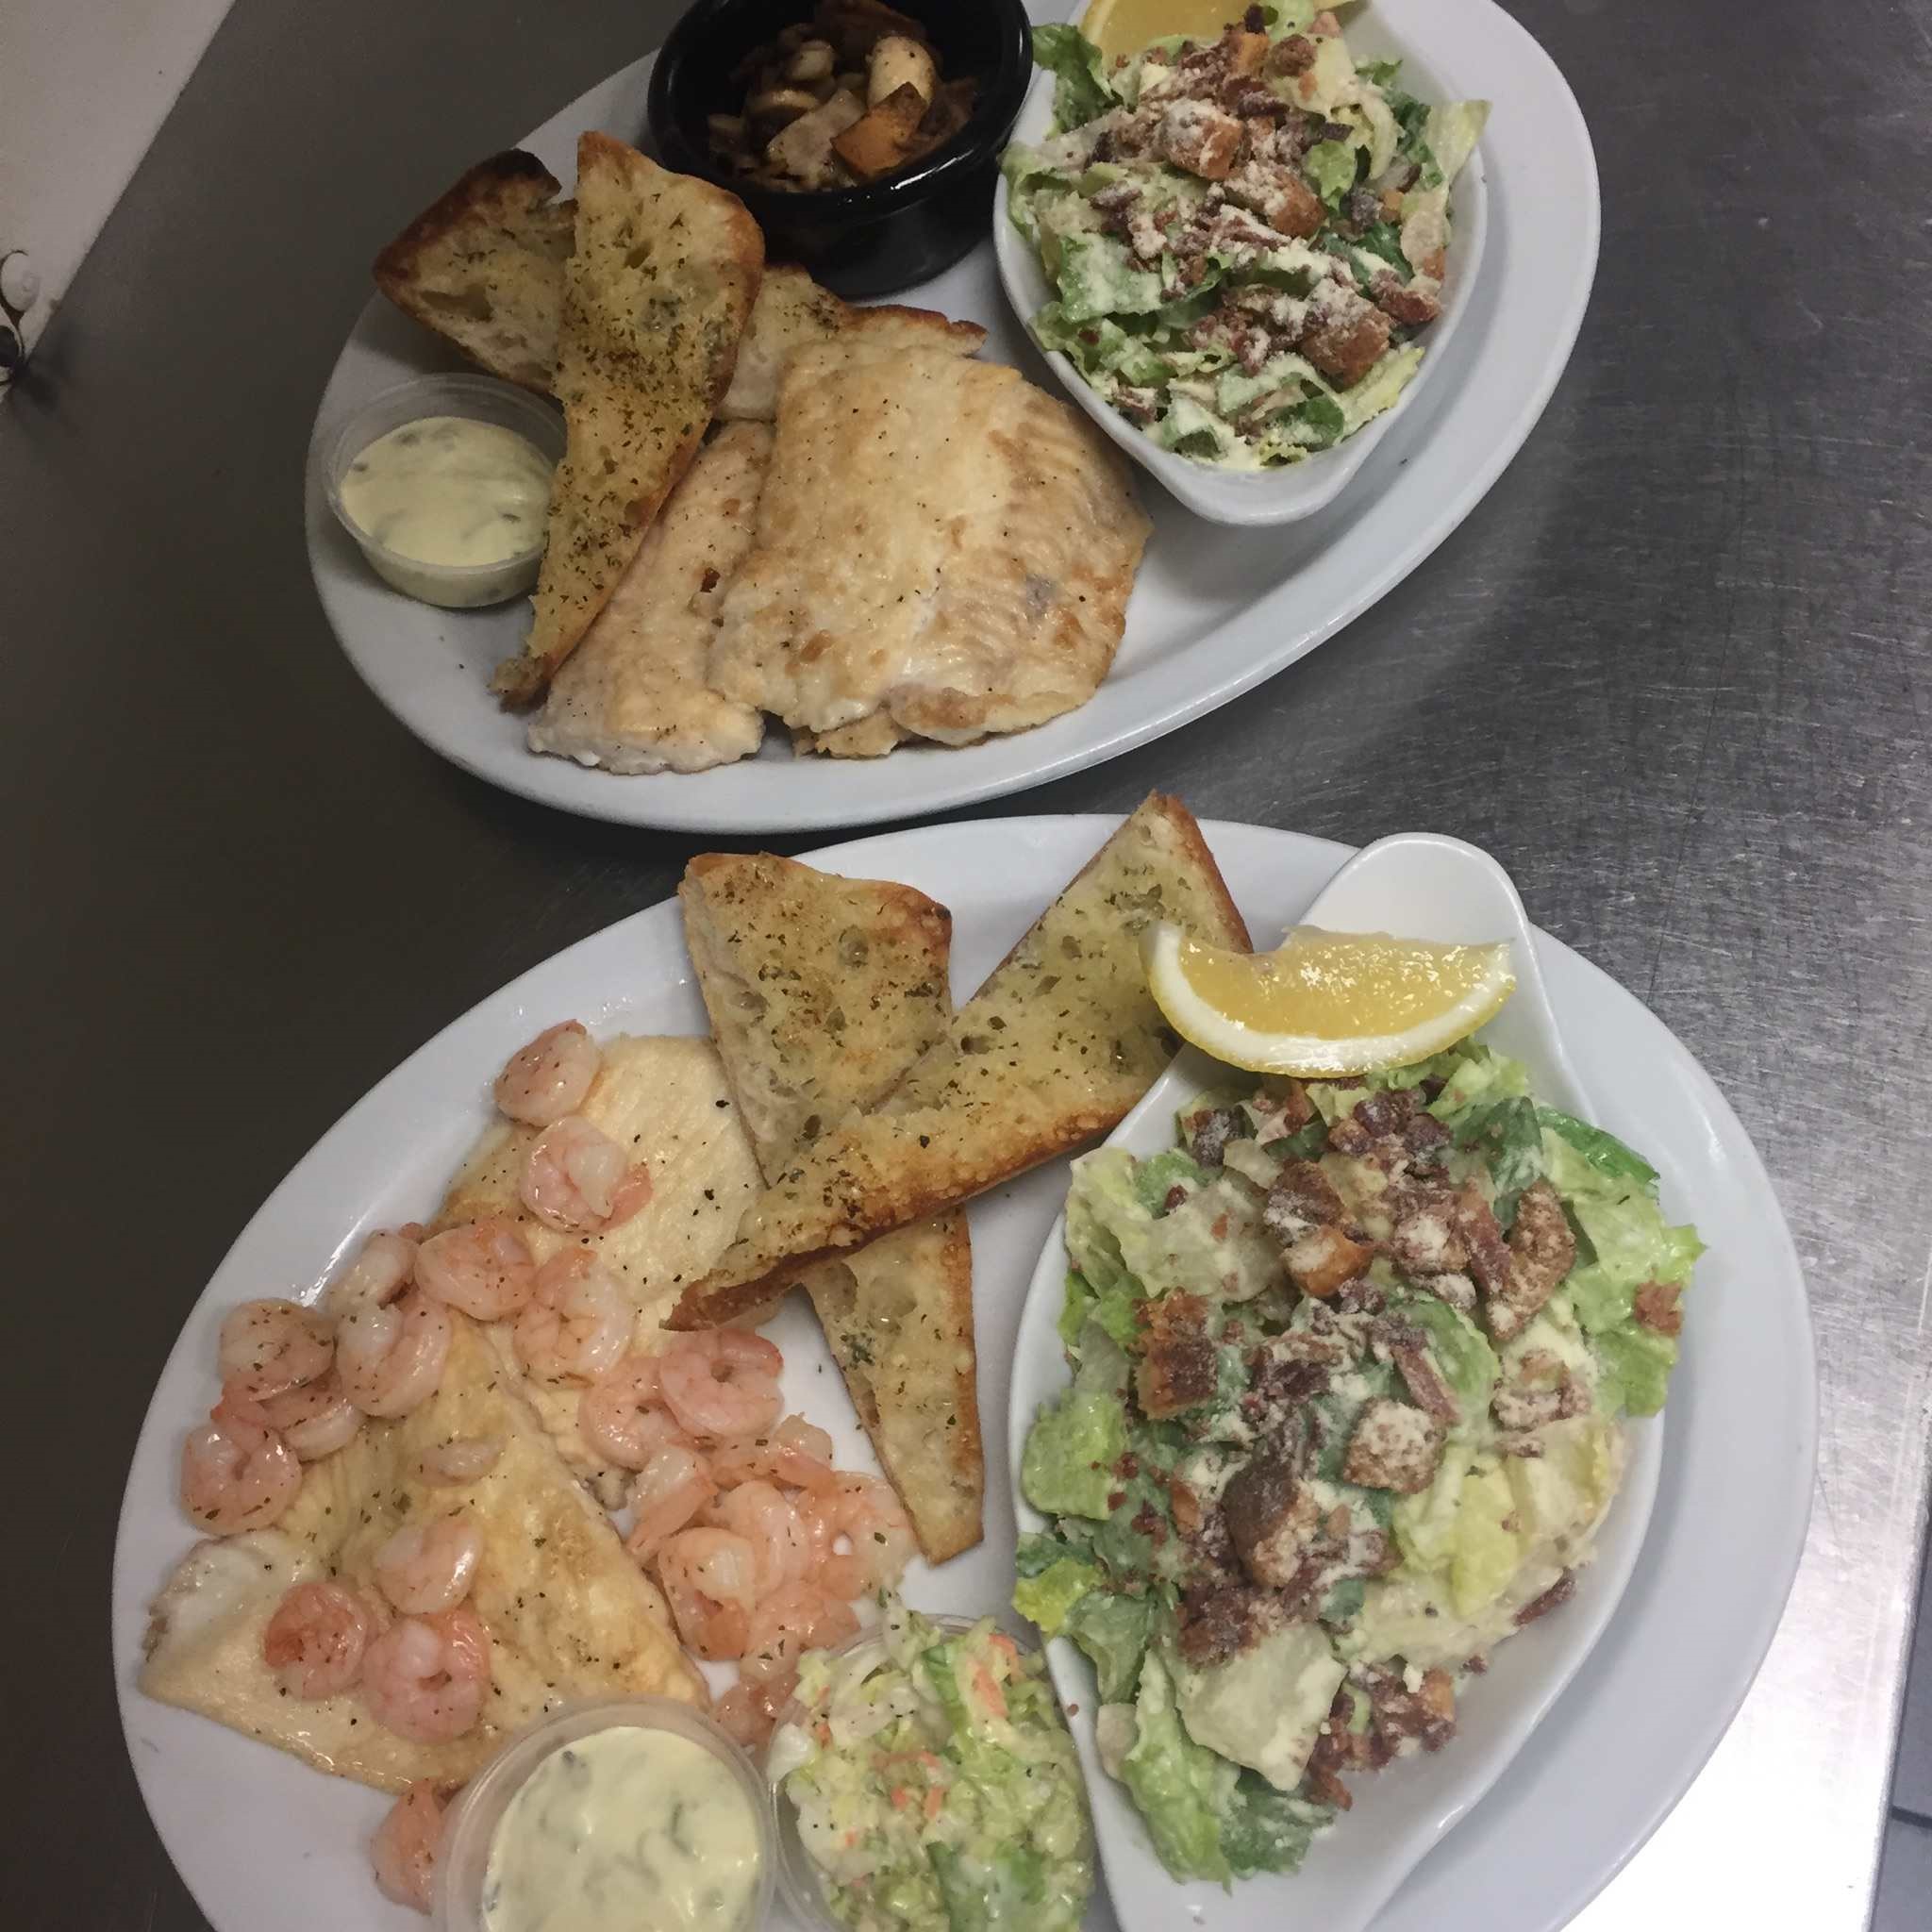 Picture of salad, shrimp and fish